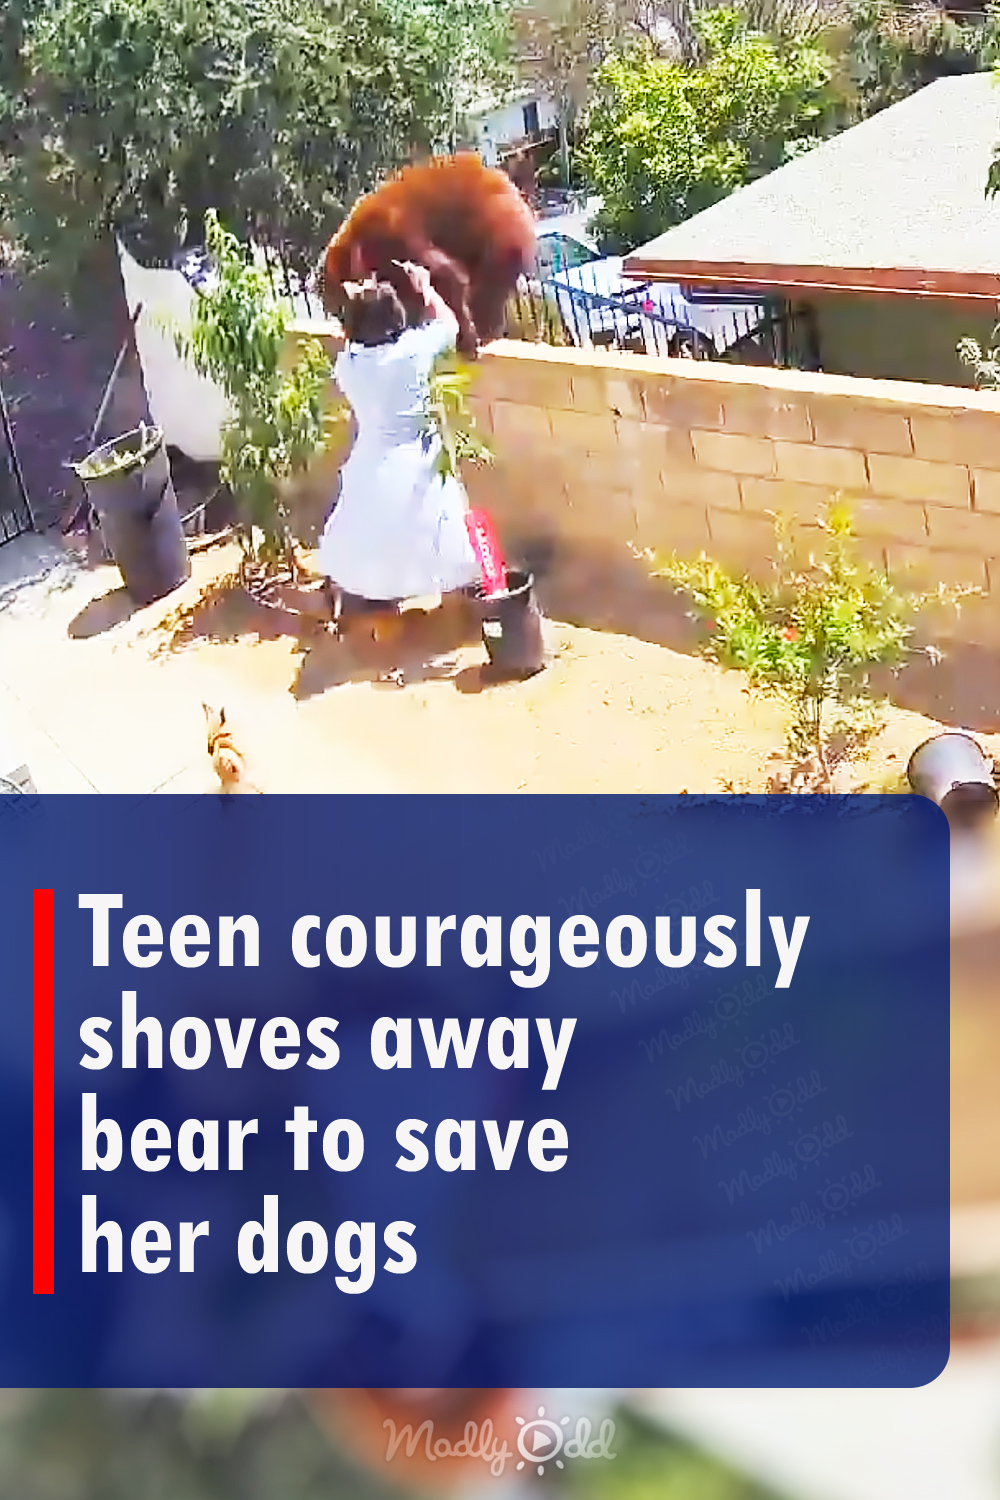 Teen courageously shoves away bear to save her dogs